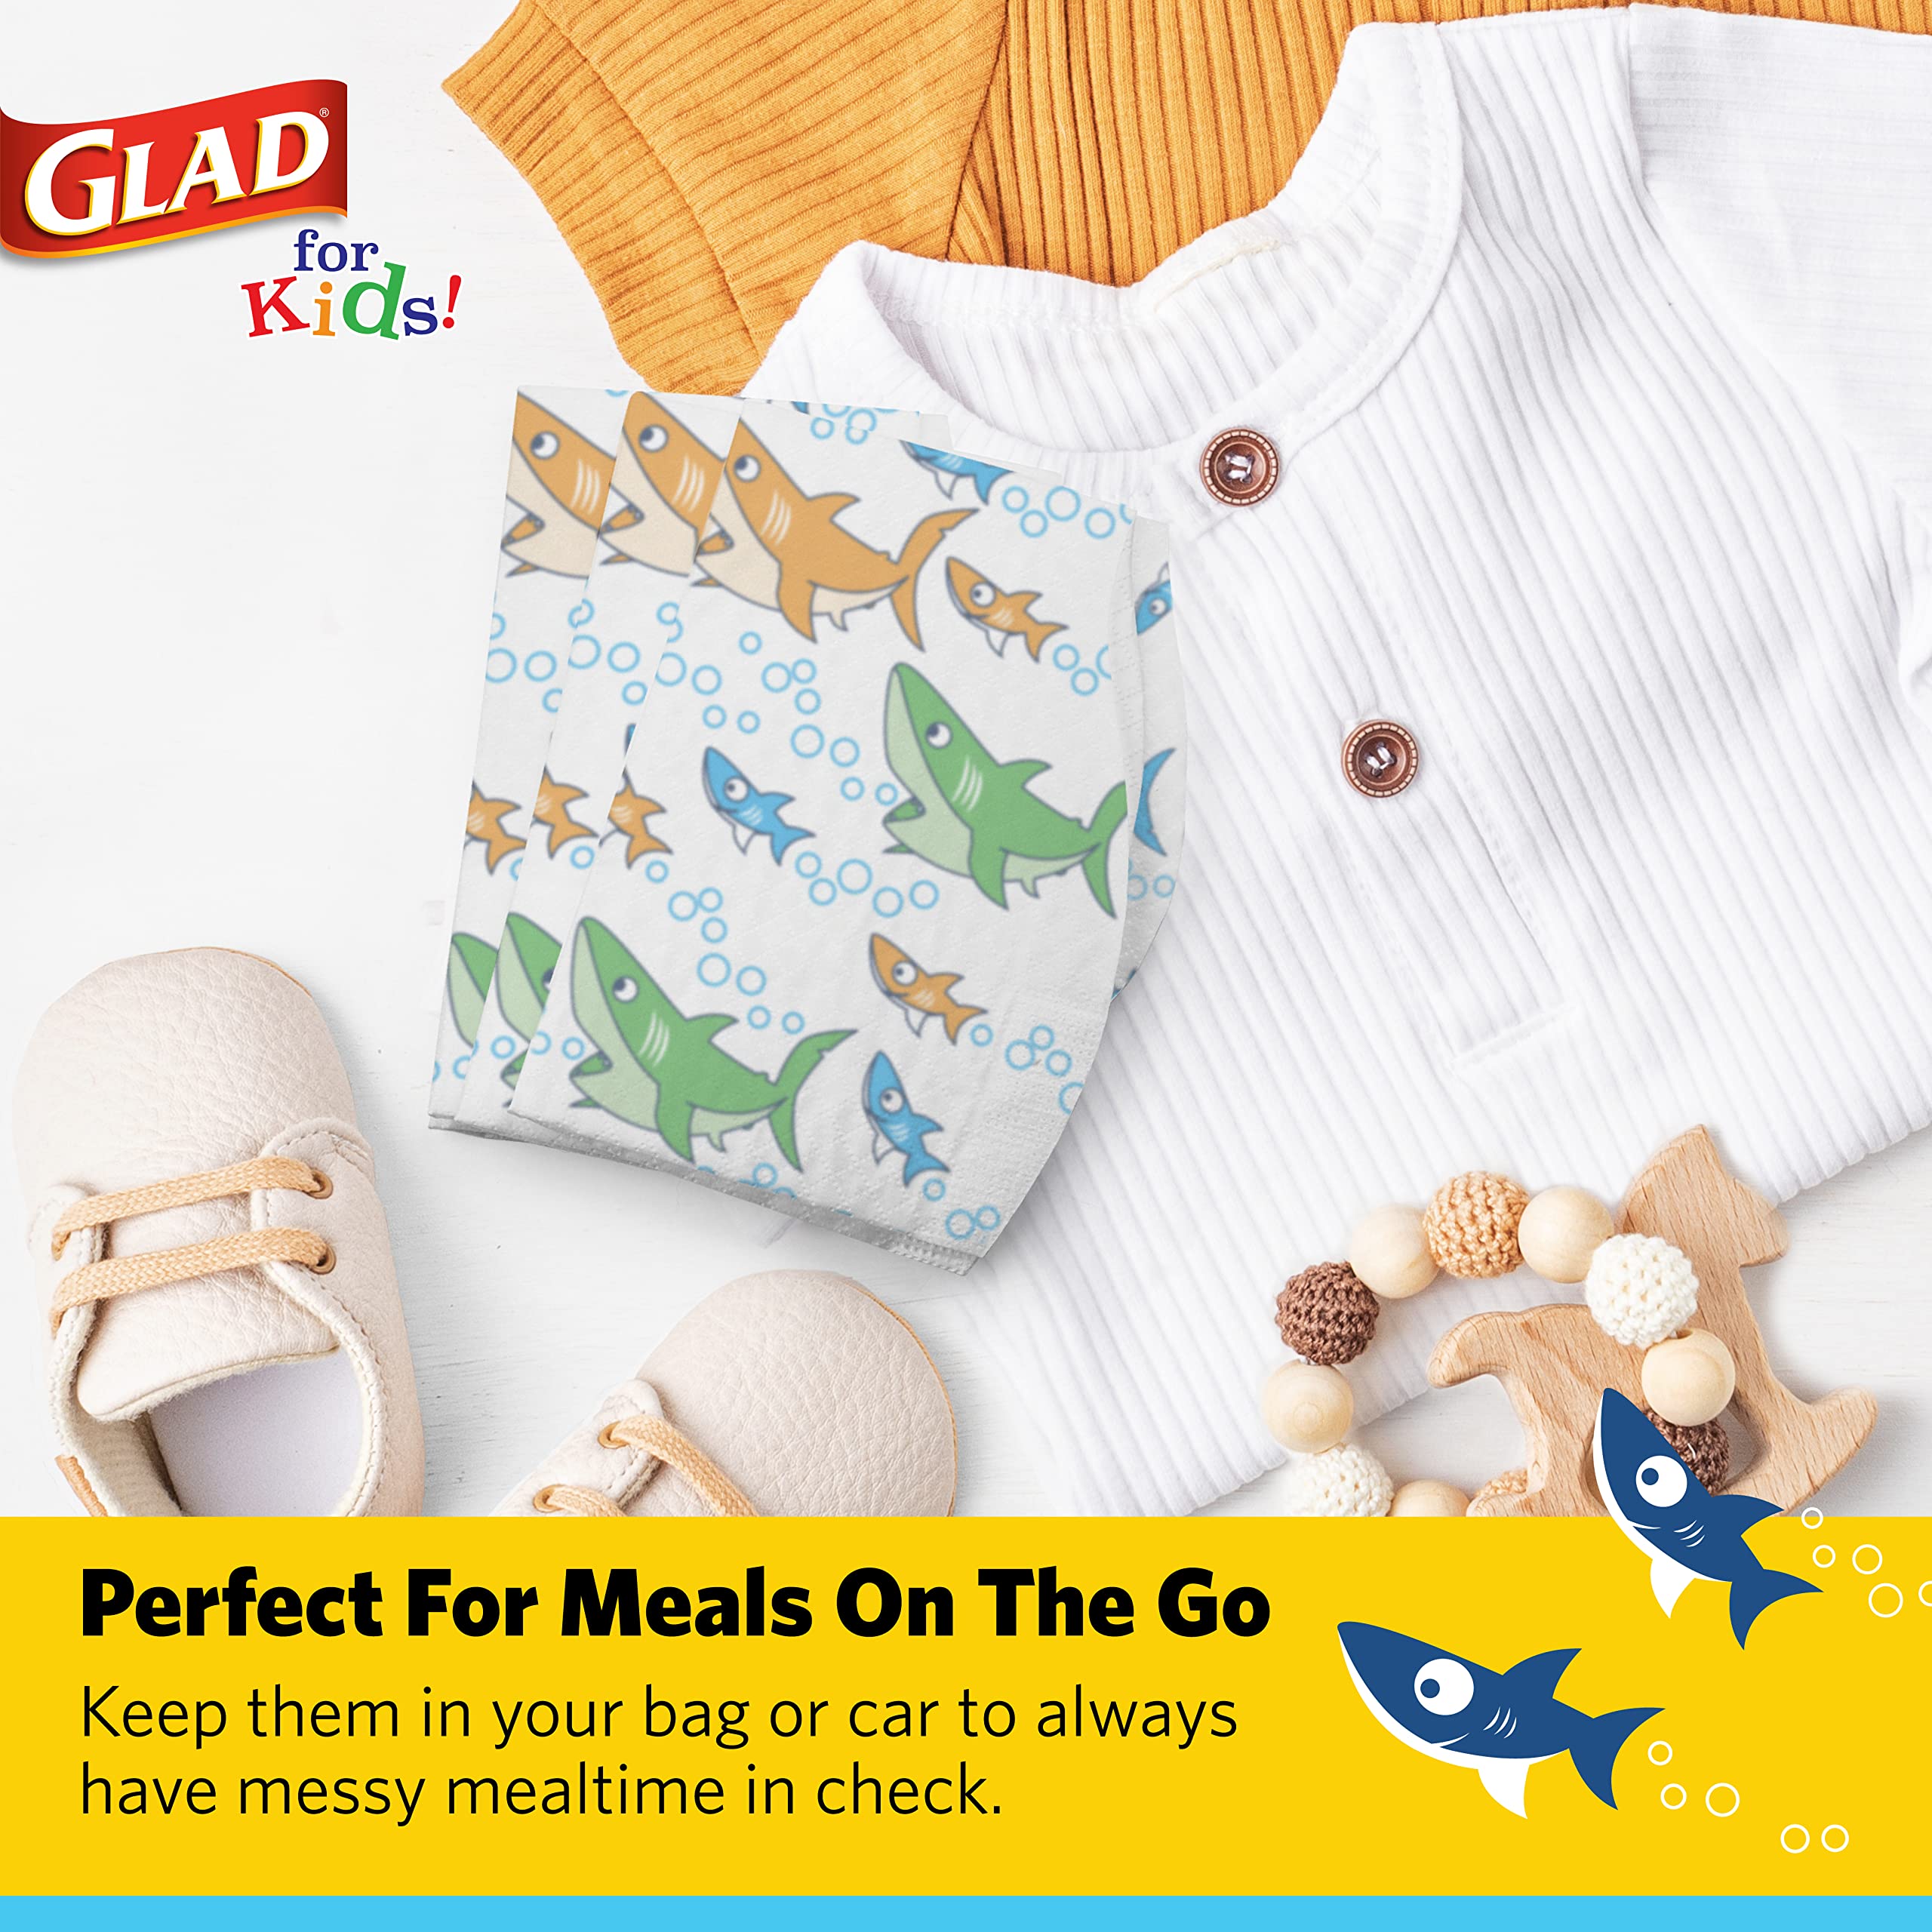 Glad For Kids Disposable Paper Bibs, 30 Ct - Disposable Bibs - Travel Bibs For Kids, Disposable Kids Bibs With Crumb Catcher